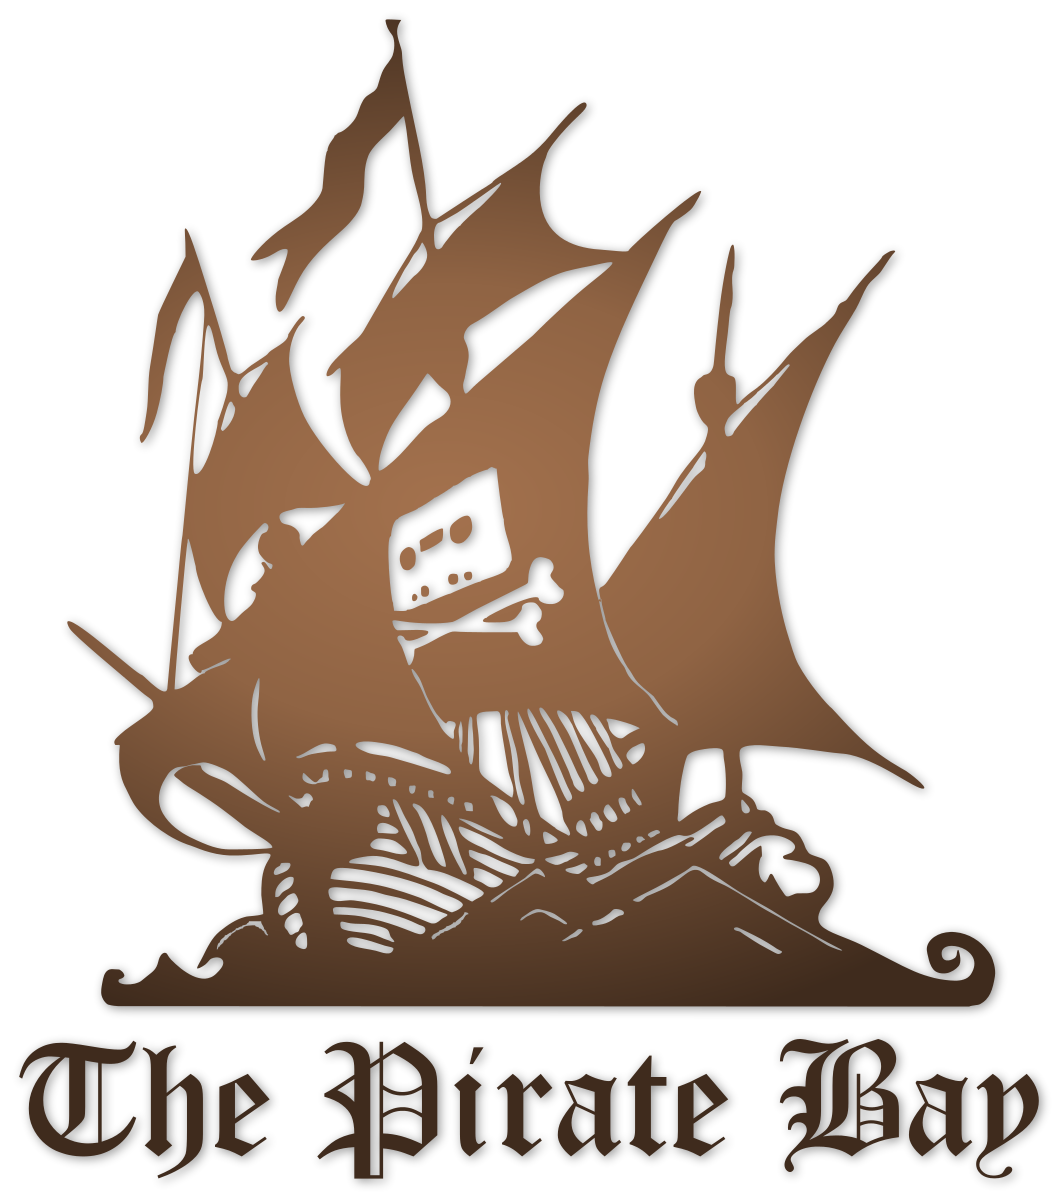 Convicted Pirate Bay CoFounder Says Site Should Stay Shuttered